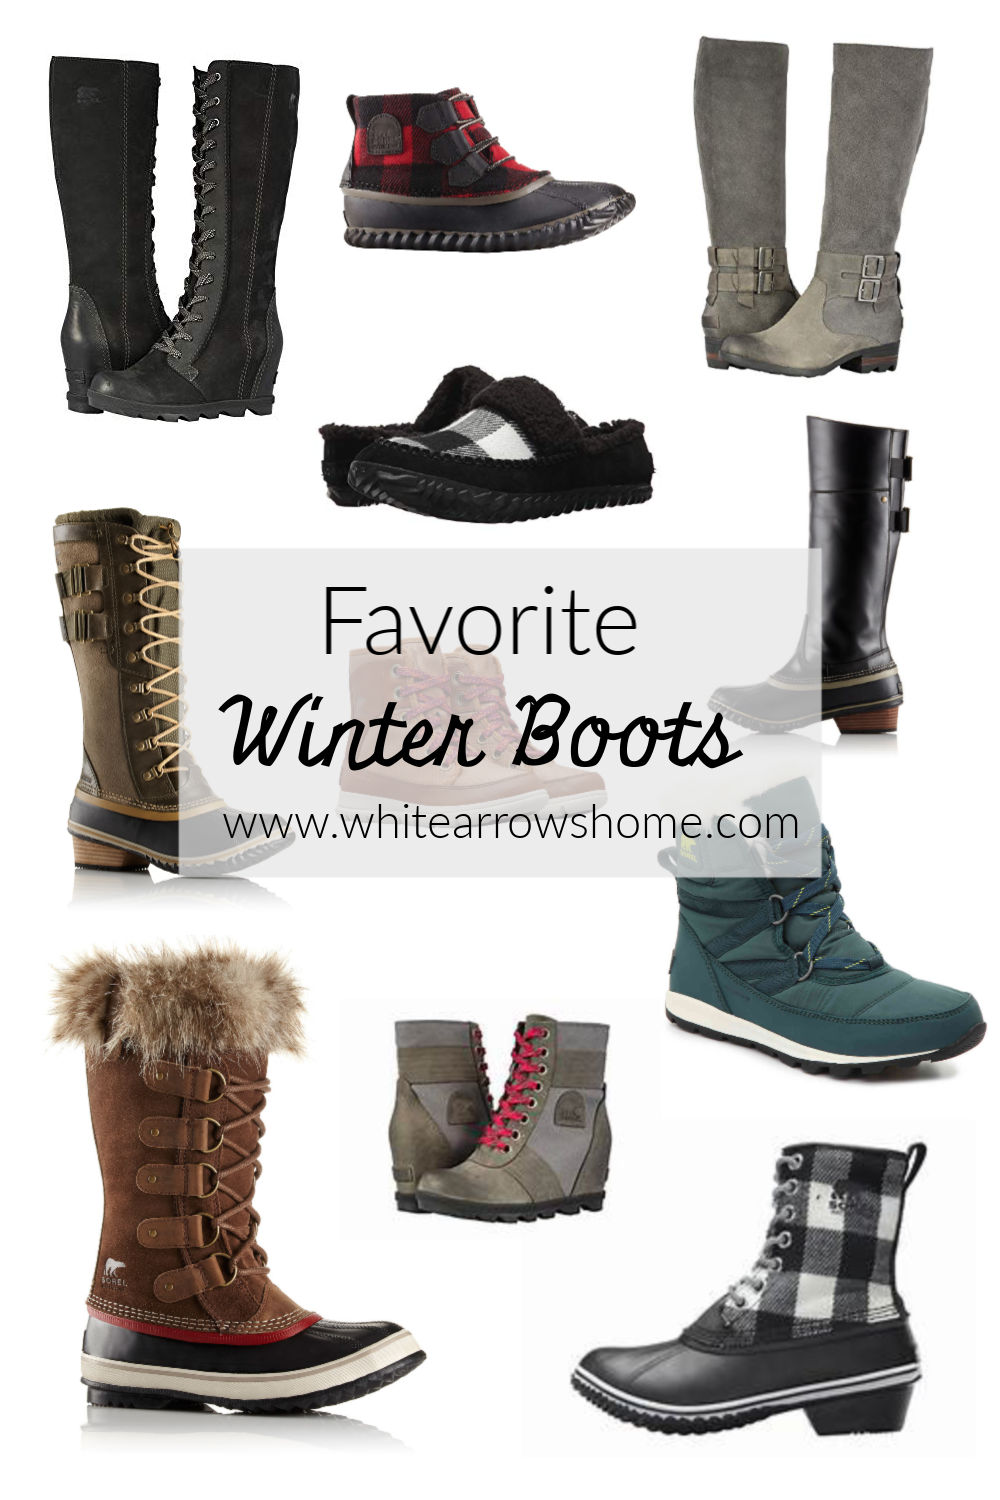 My Favorite Boots for Fall and Winter ~ White Arrows Home